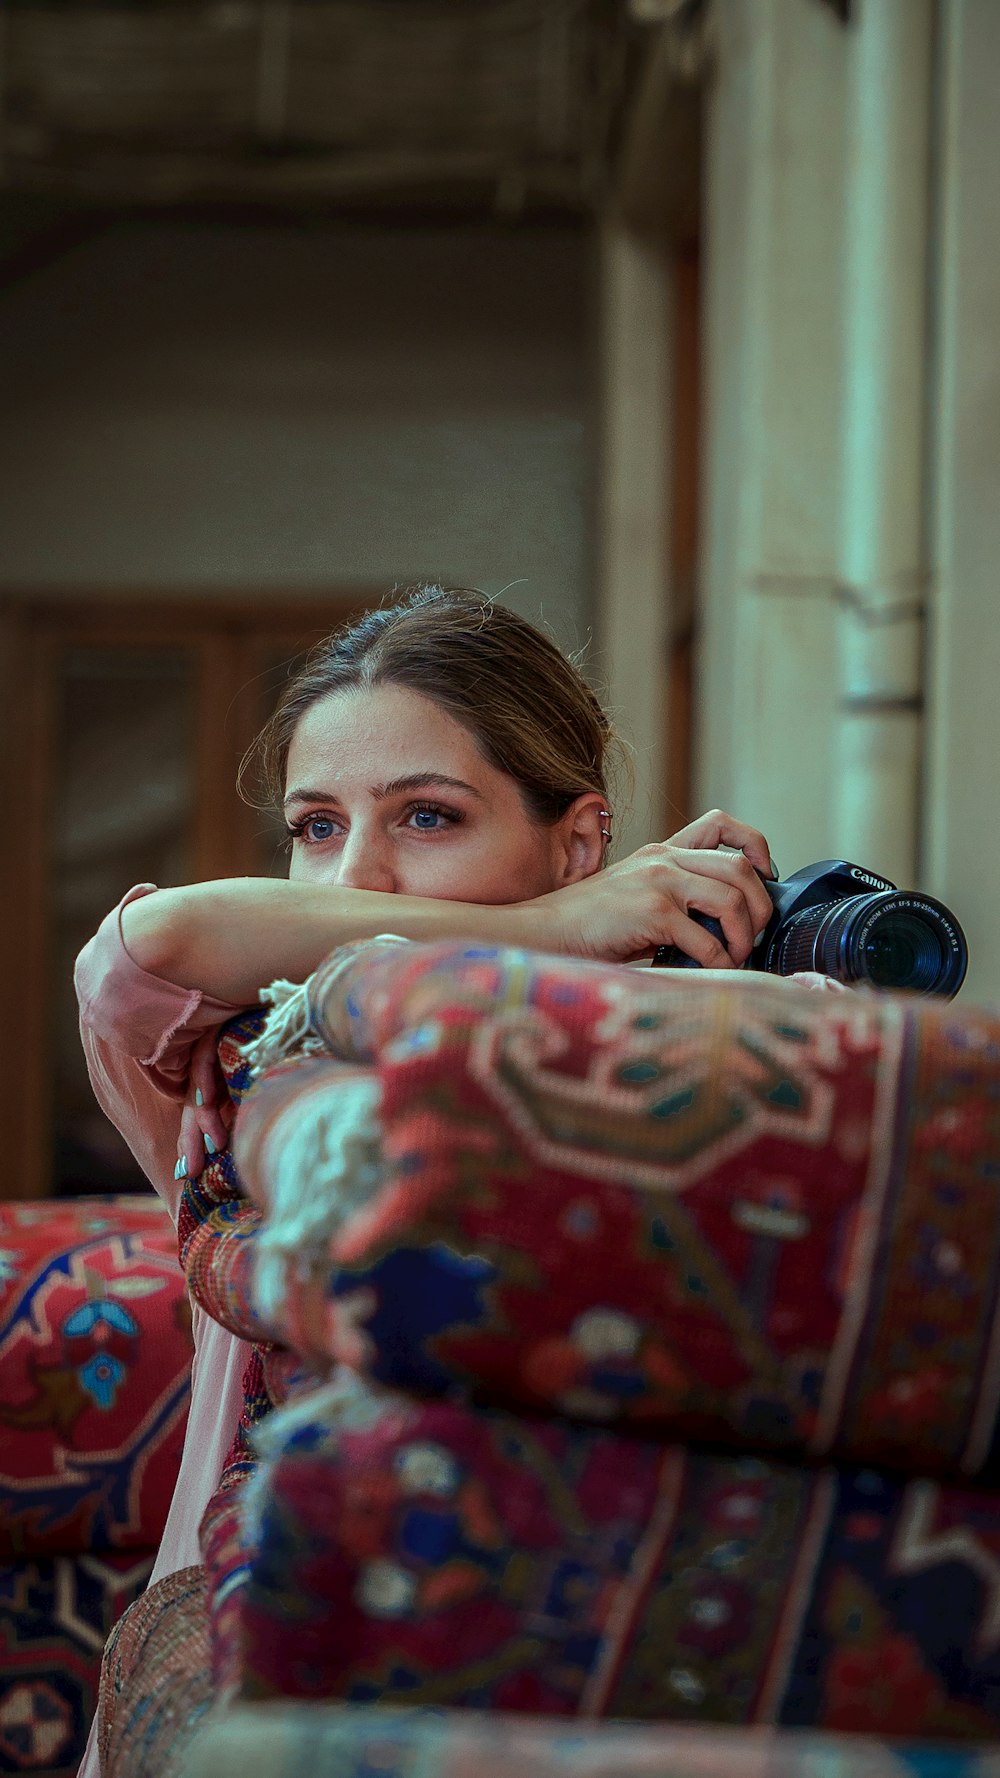 a woman sitting on a couch with a camera in her hand